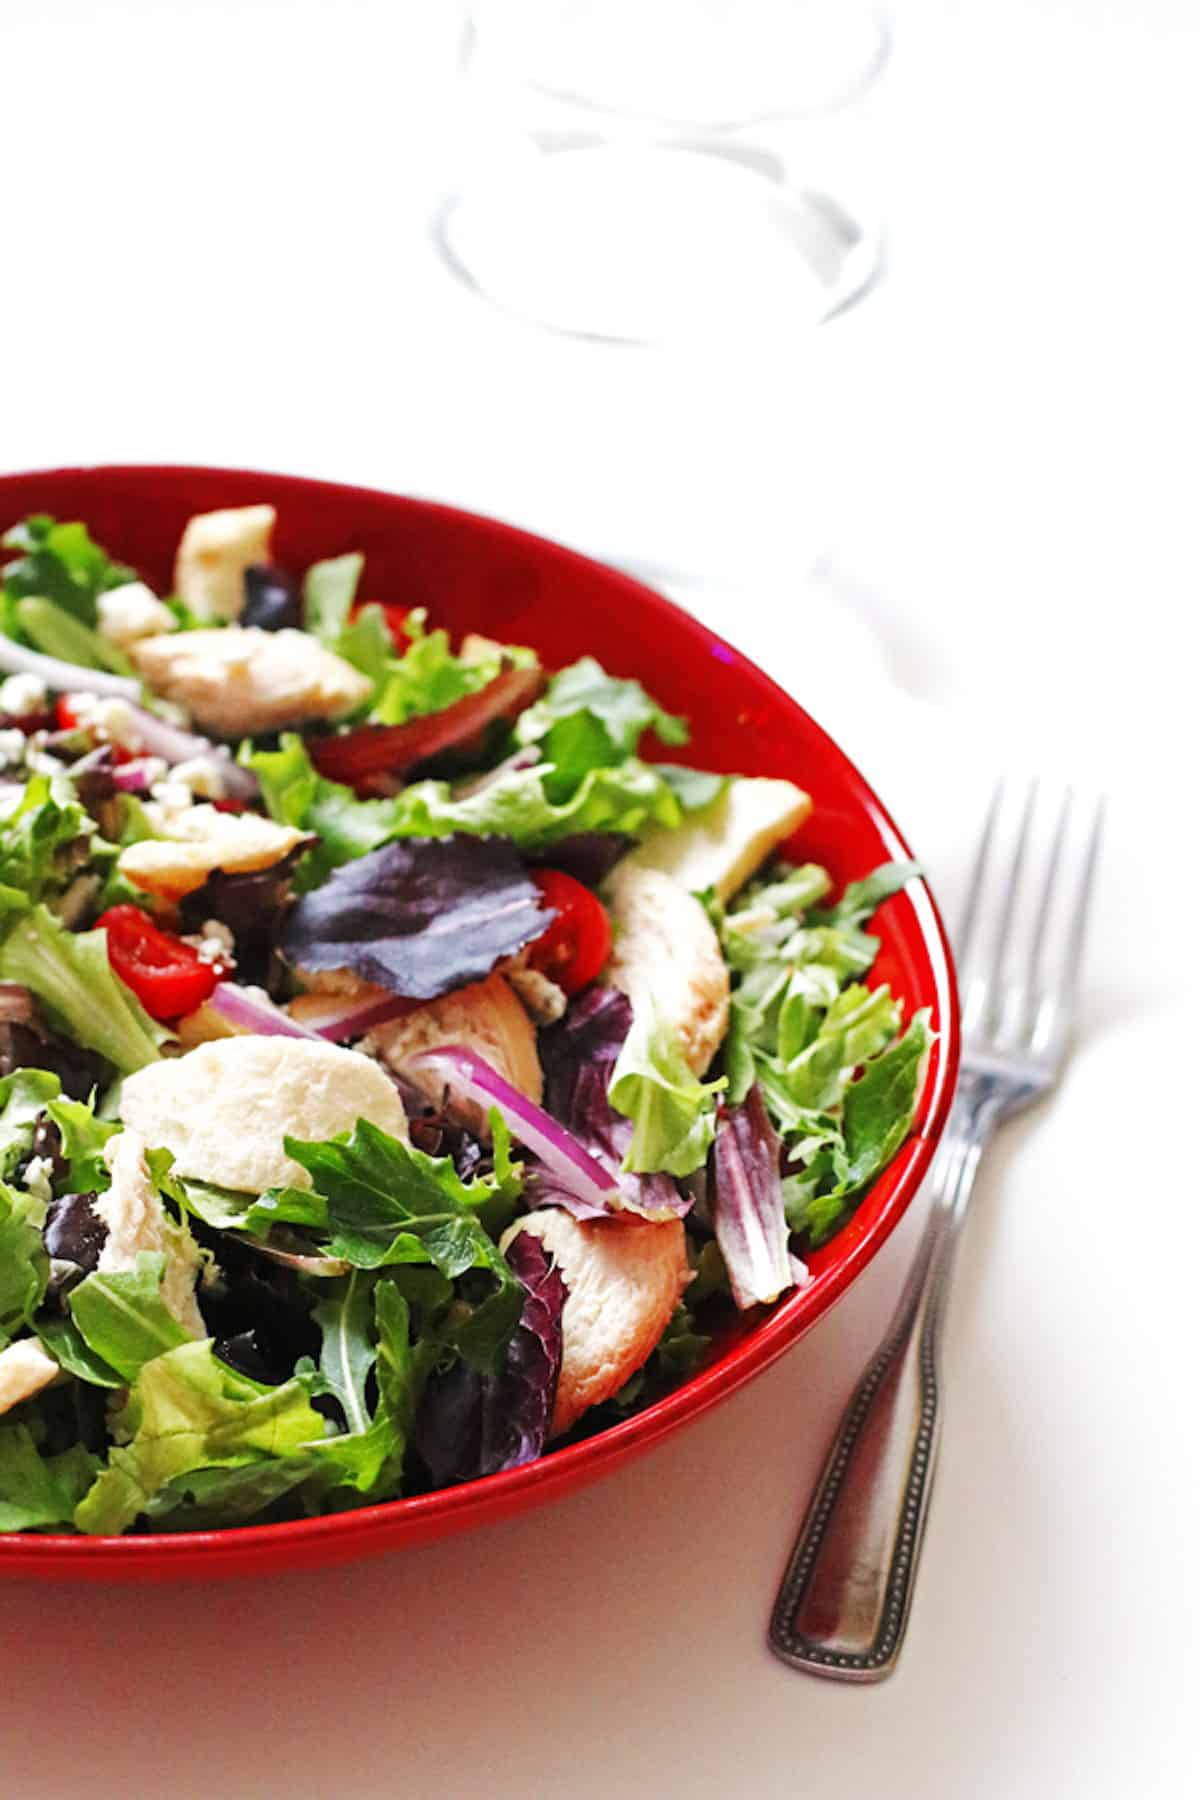 A red bowl of panera fuji apple chicken salad with red leaf lettuce and greens, red onions, tomatoes, chicken, apple chips, gorgonzola, and white balsamic dressing.